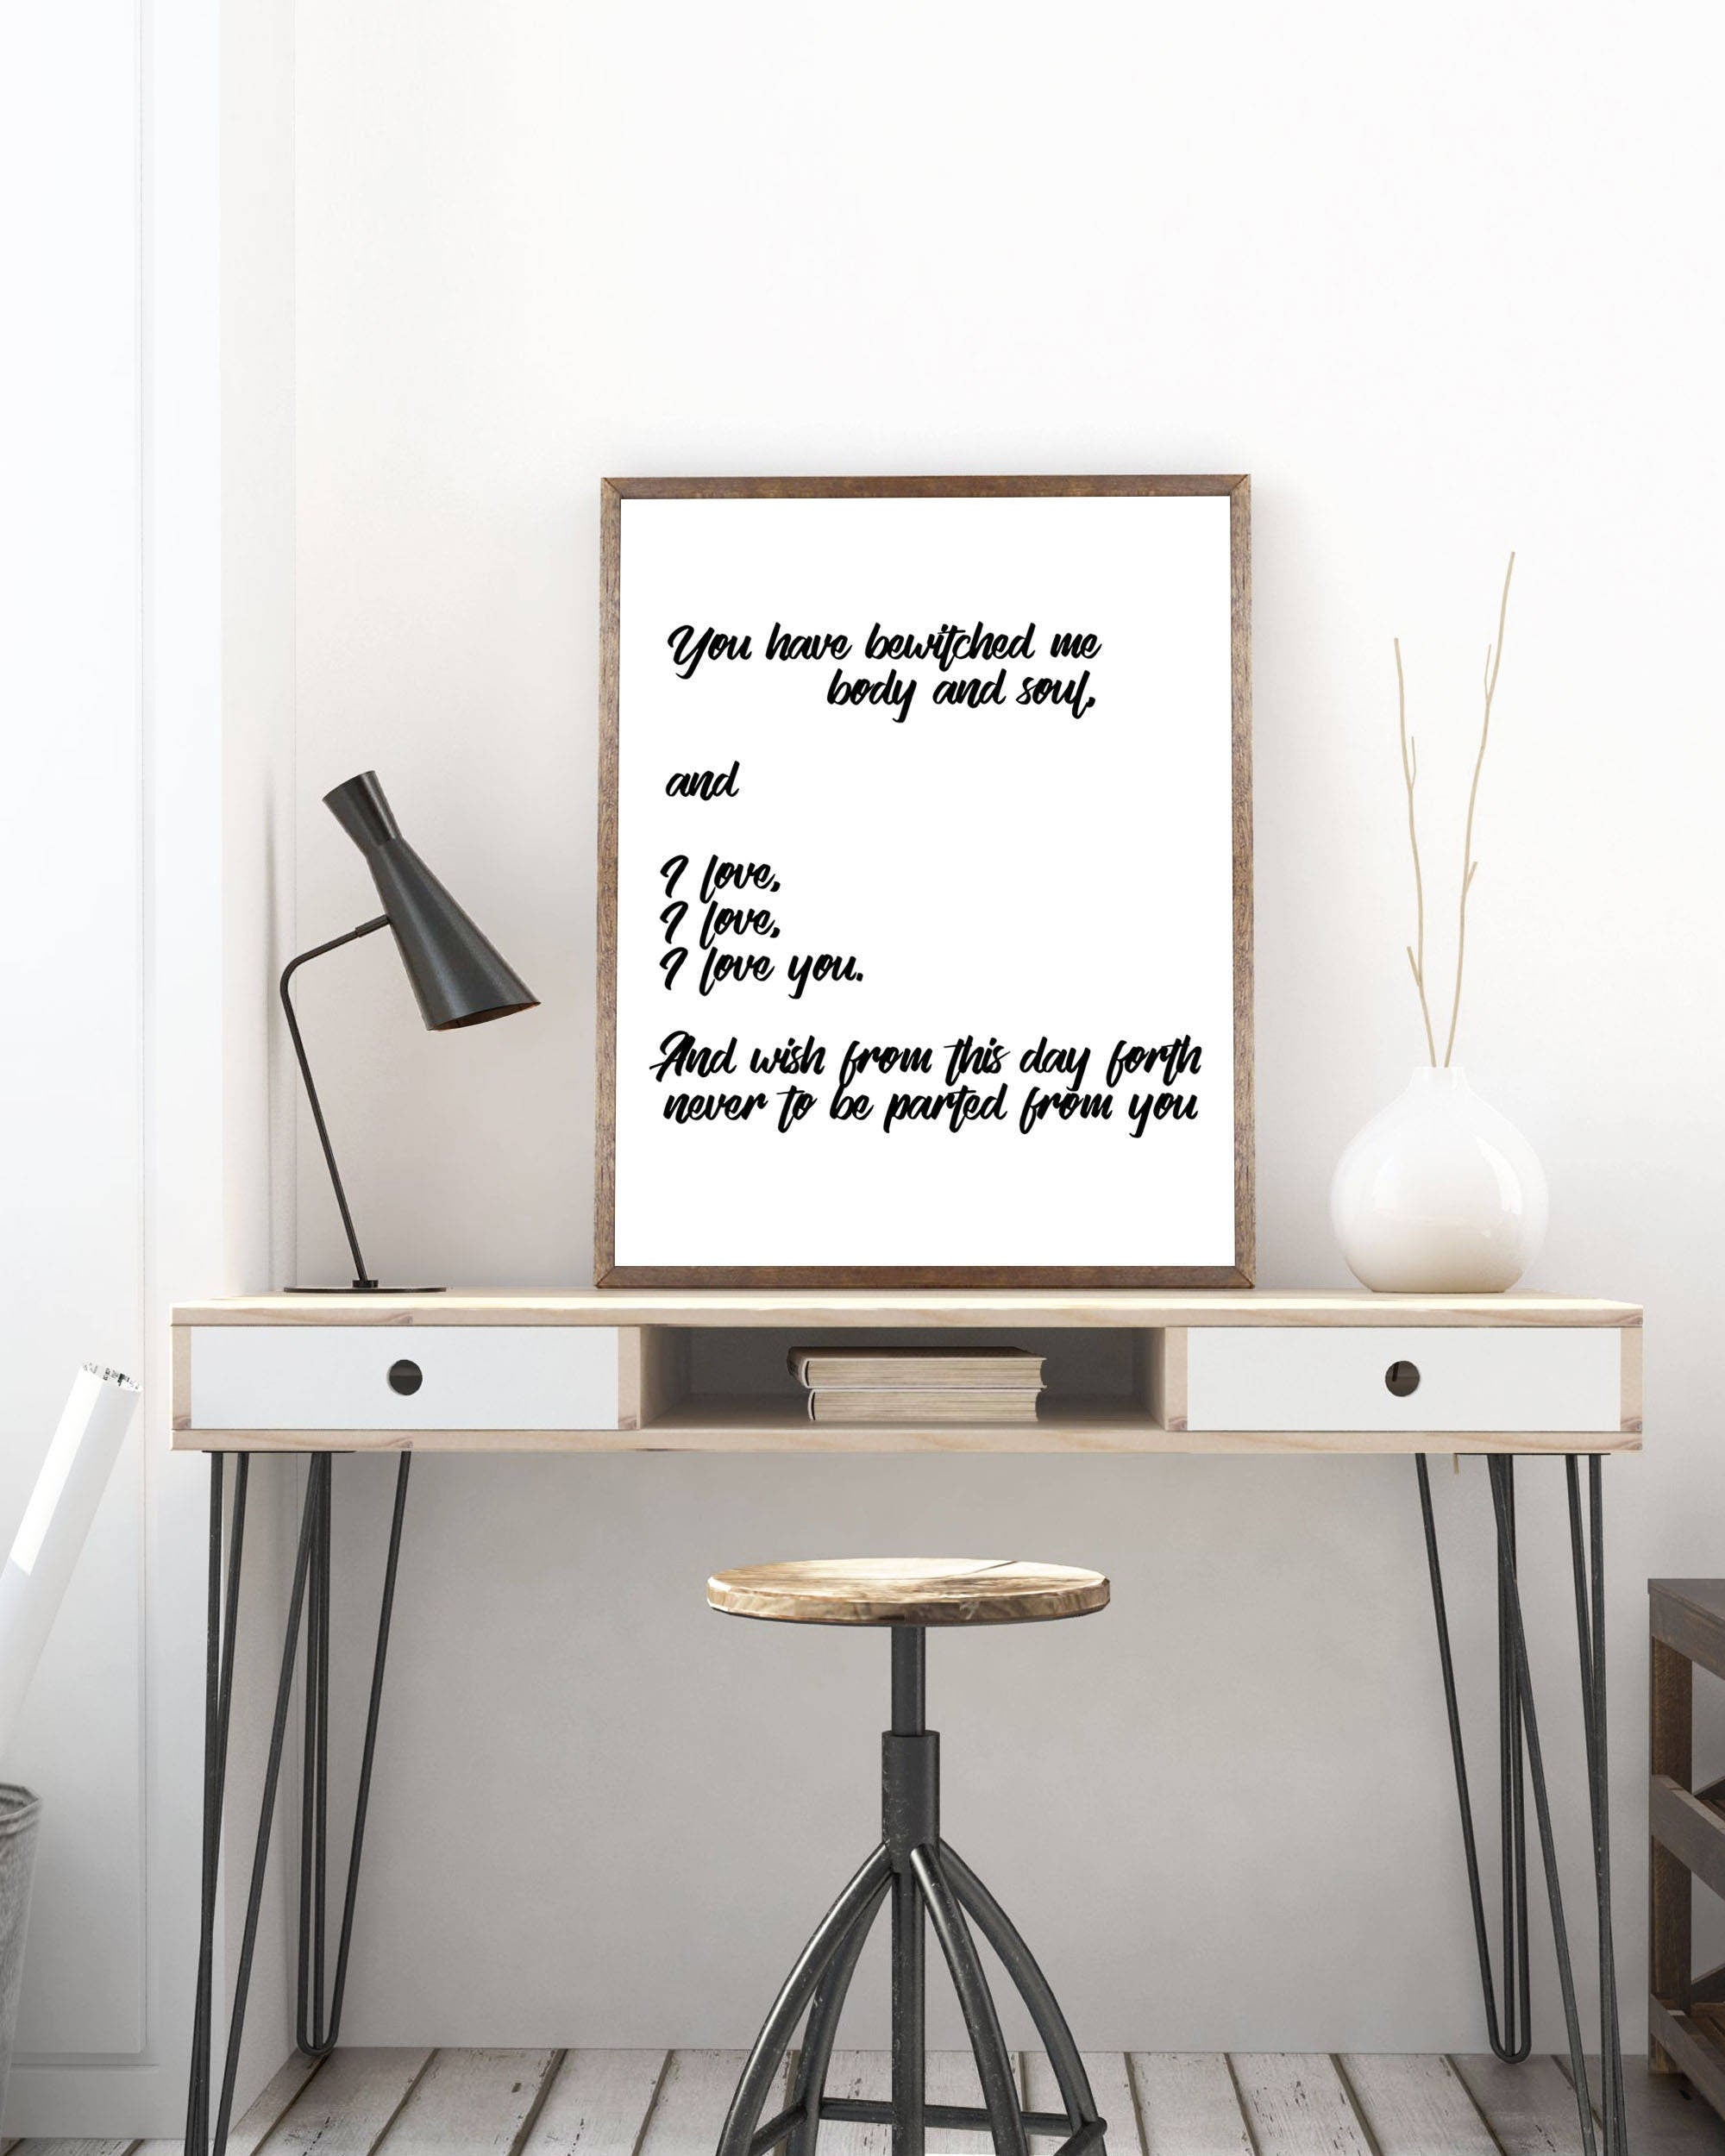 Mr Darcy Pride and Prejudice Jane Austen Quote Wall Art Print, Unframed You Have Bewitched Me Wall Decor in Black and White